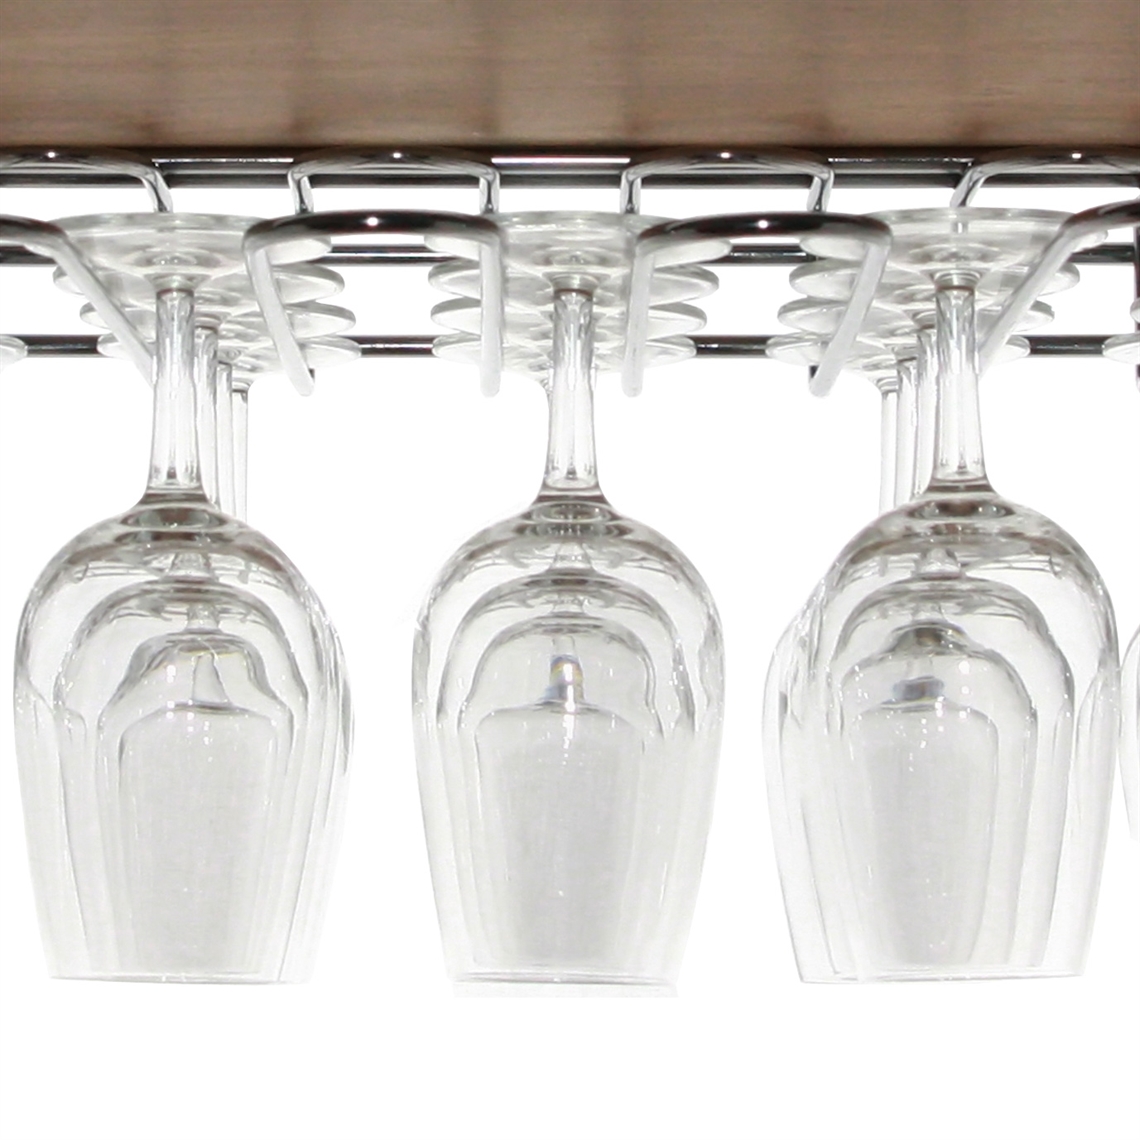 View more how to store wine in a restaurant or bar from our Wine Glass Hanging Racks range